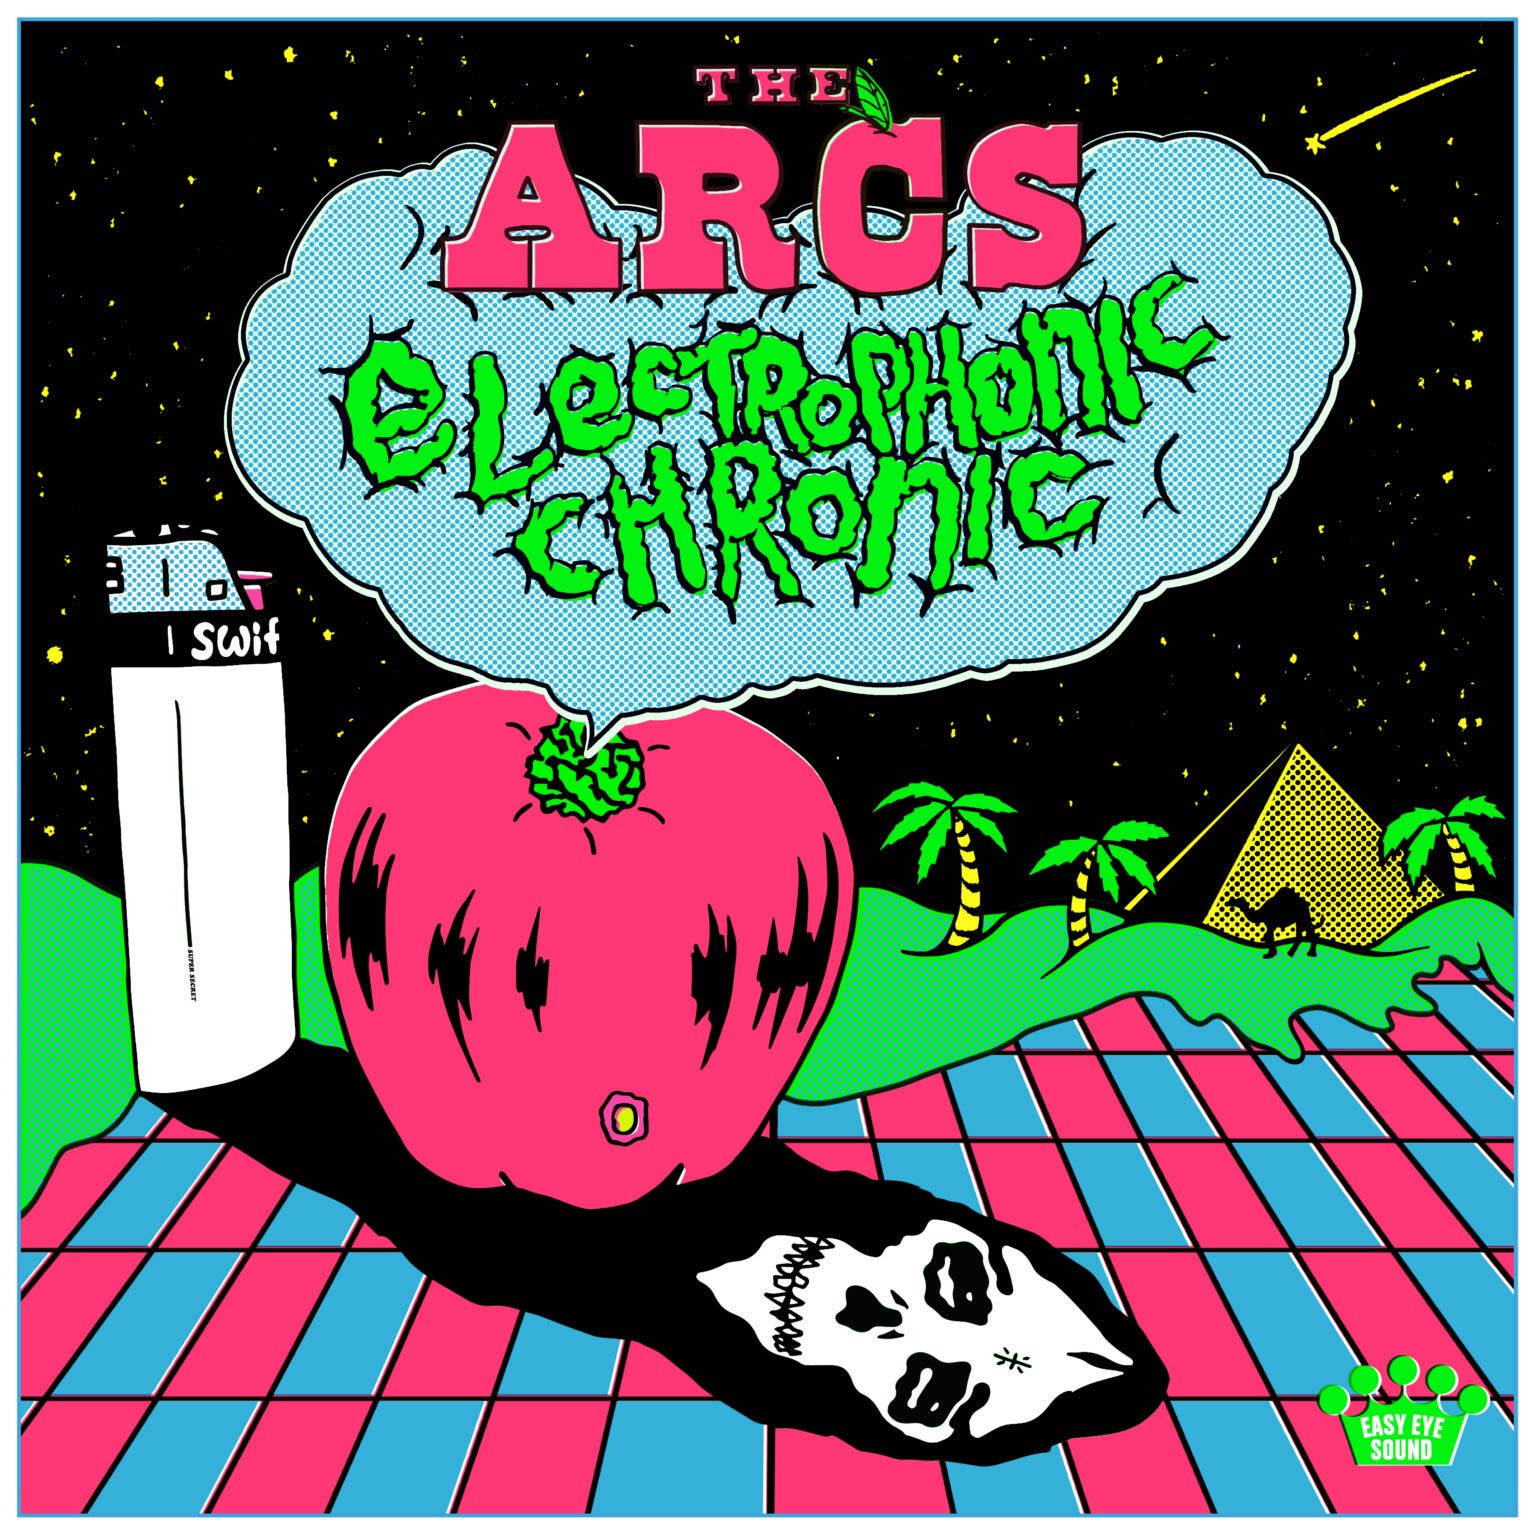 THE ARCS RELEASE THEIR FIRST FULL LENGTH ALBUM IN 8 YEARS, ‘ELECTROPHONIC CHRONIC’